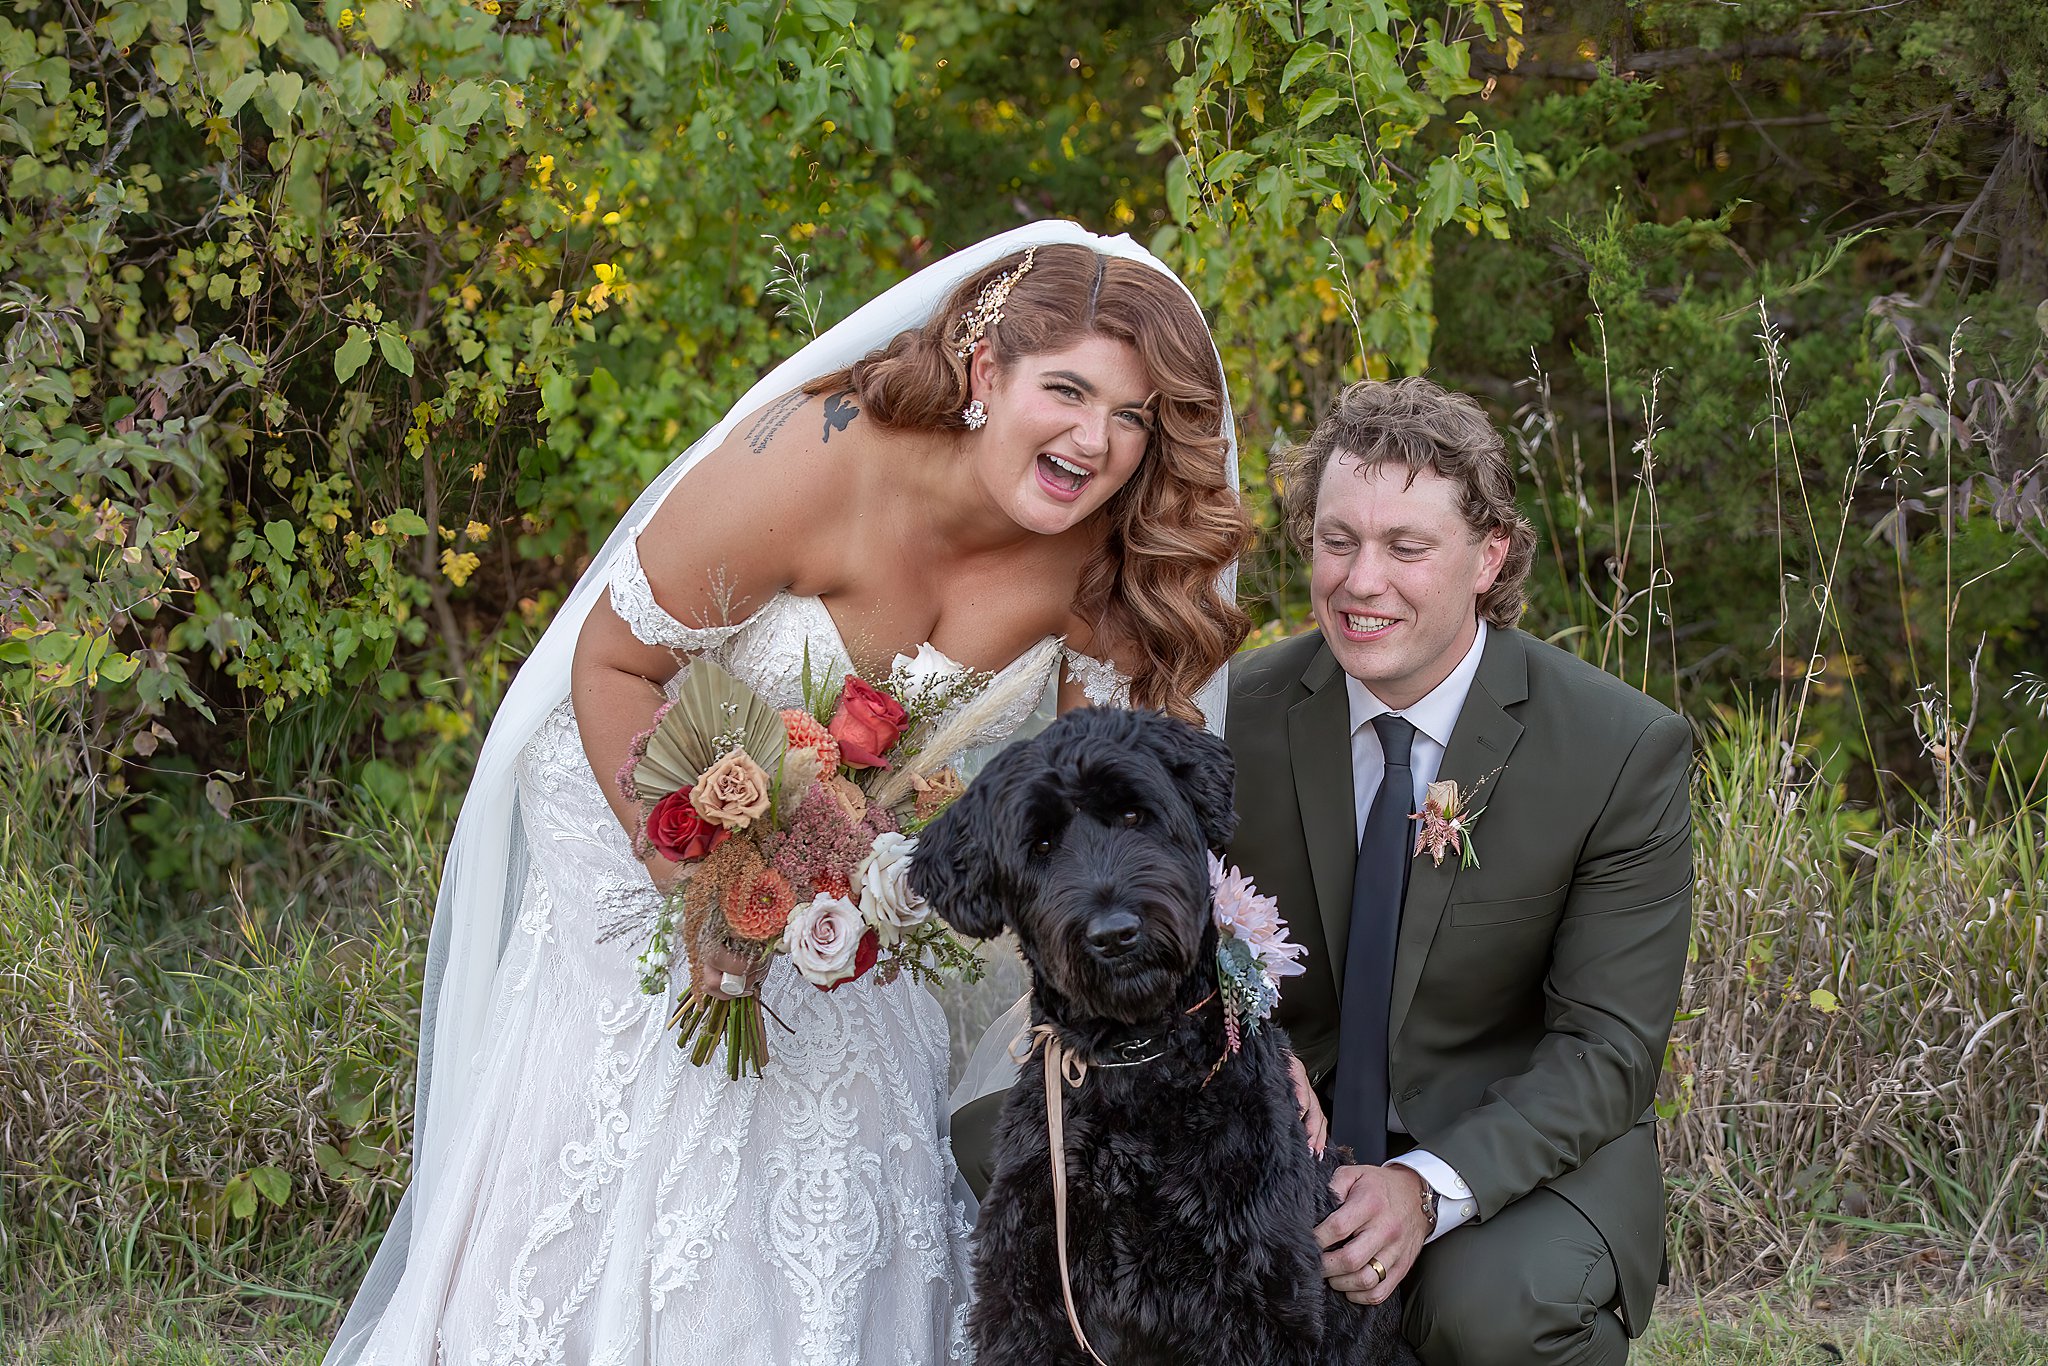 Newlyweds play in a forest with their large black dog